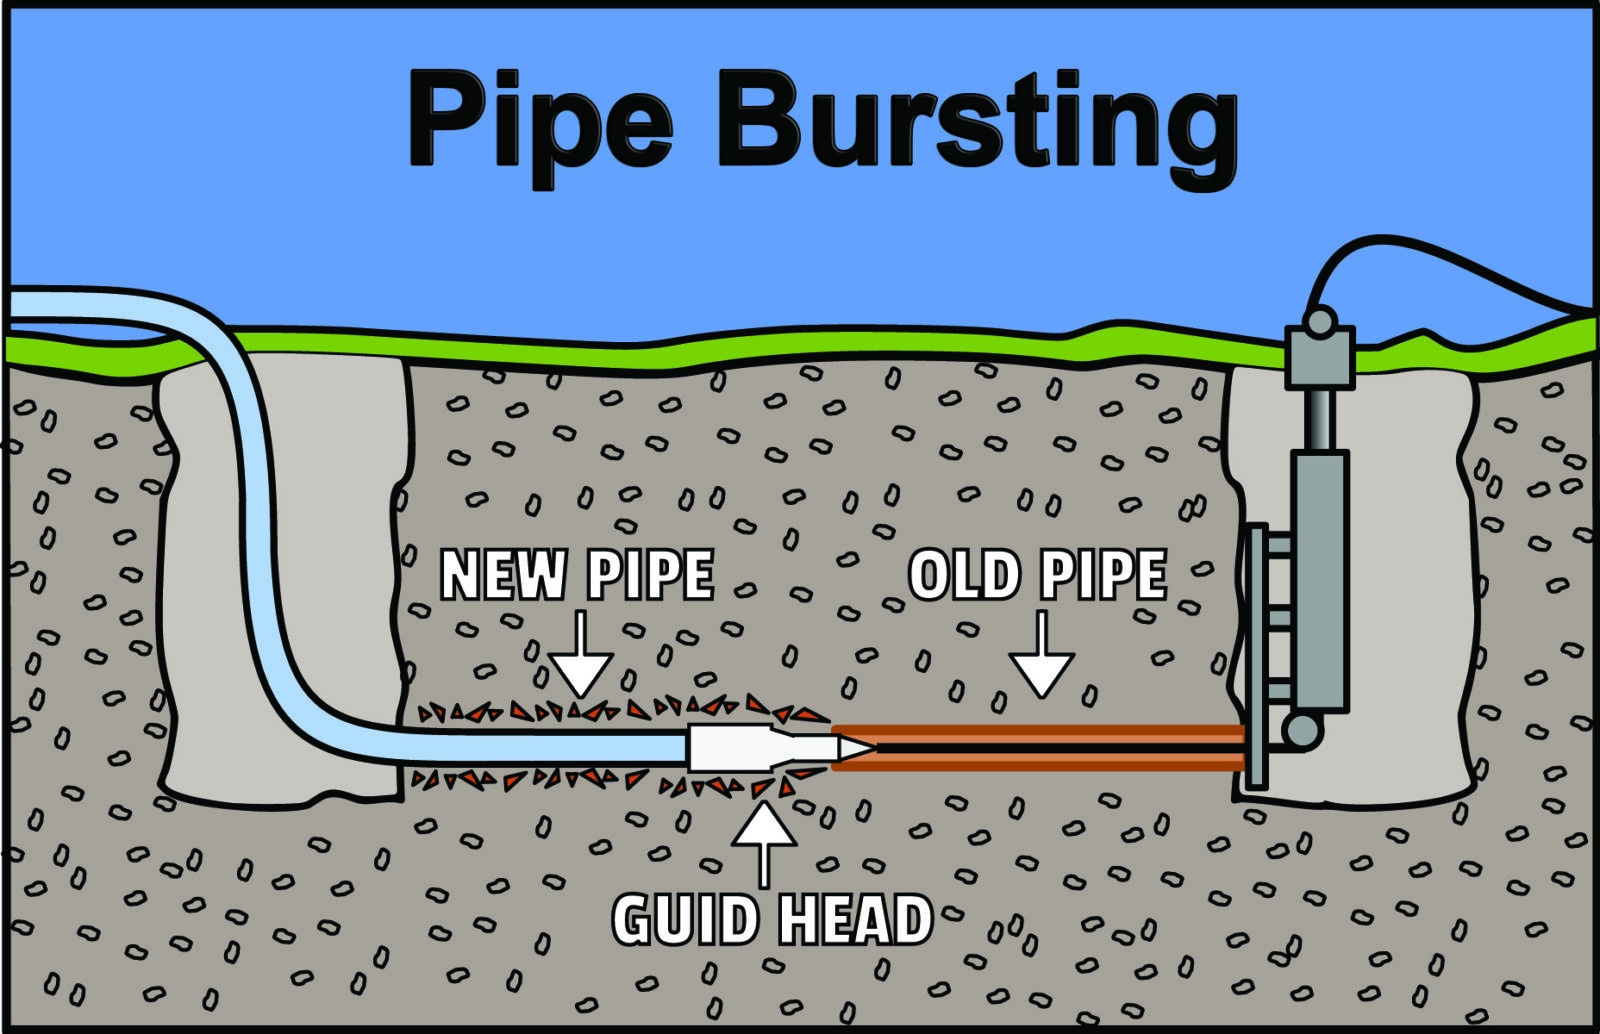 pipe bursting graphic showing new pipe, old pipe, and guide head